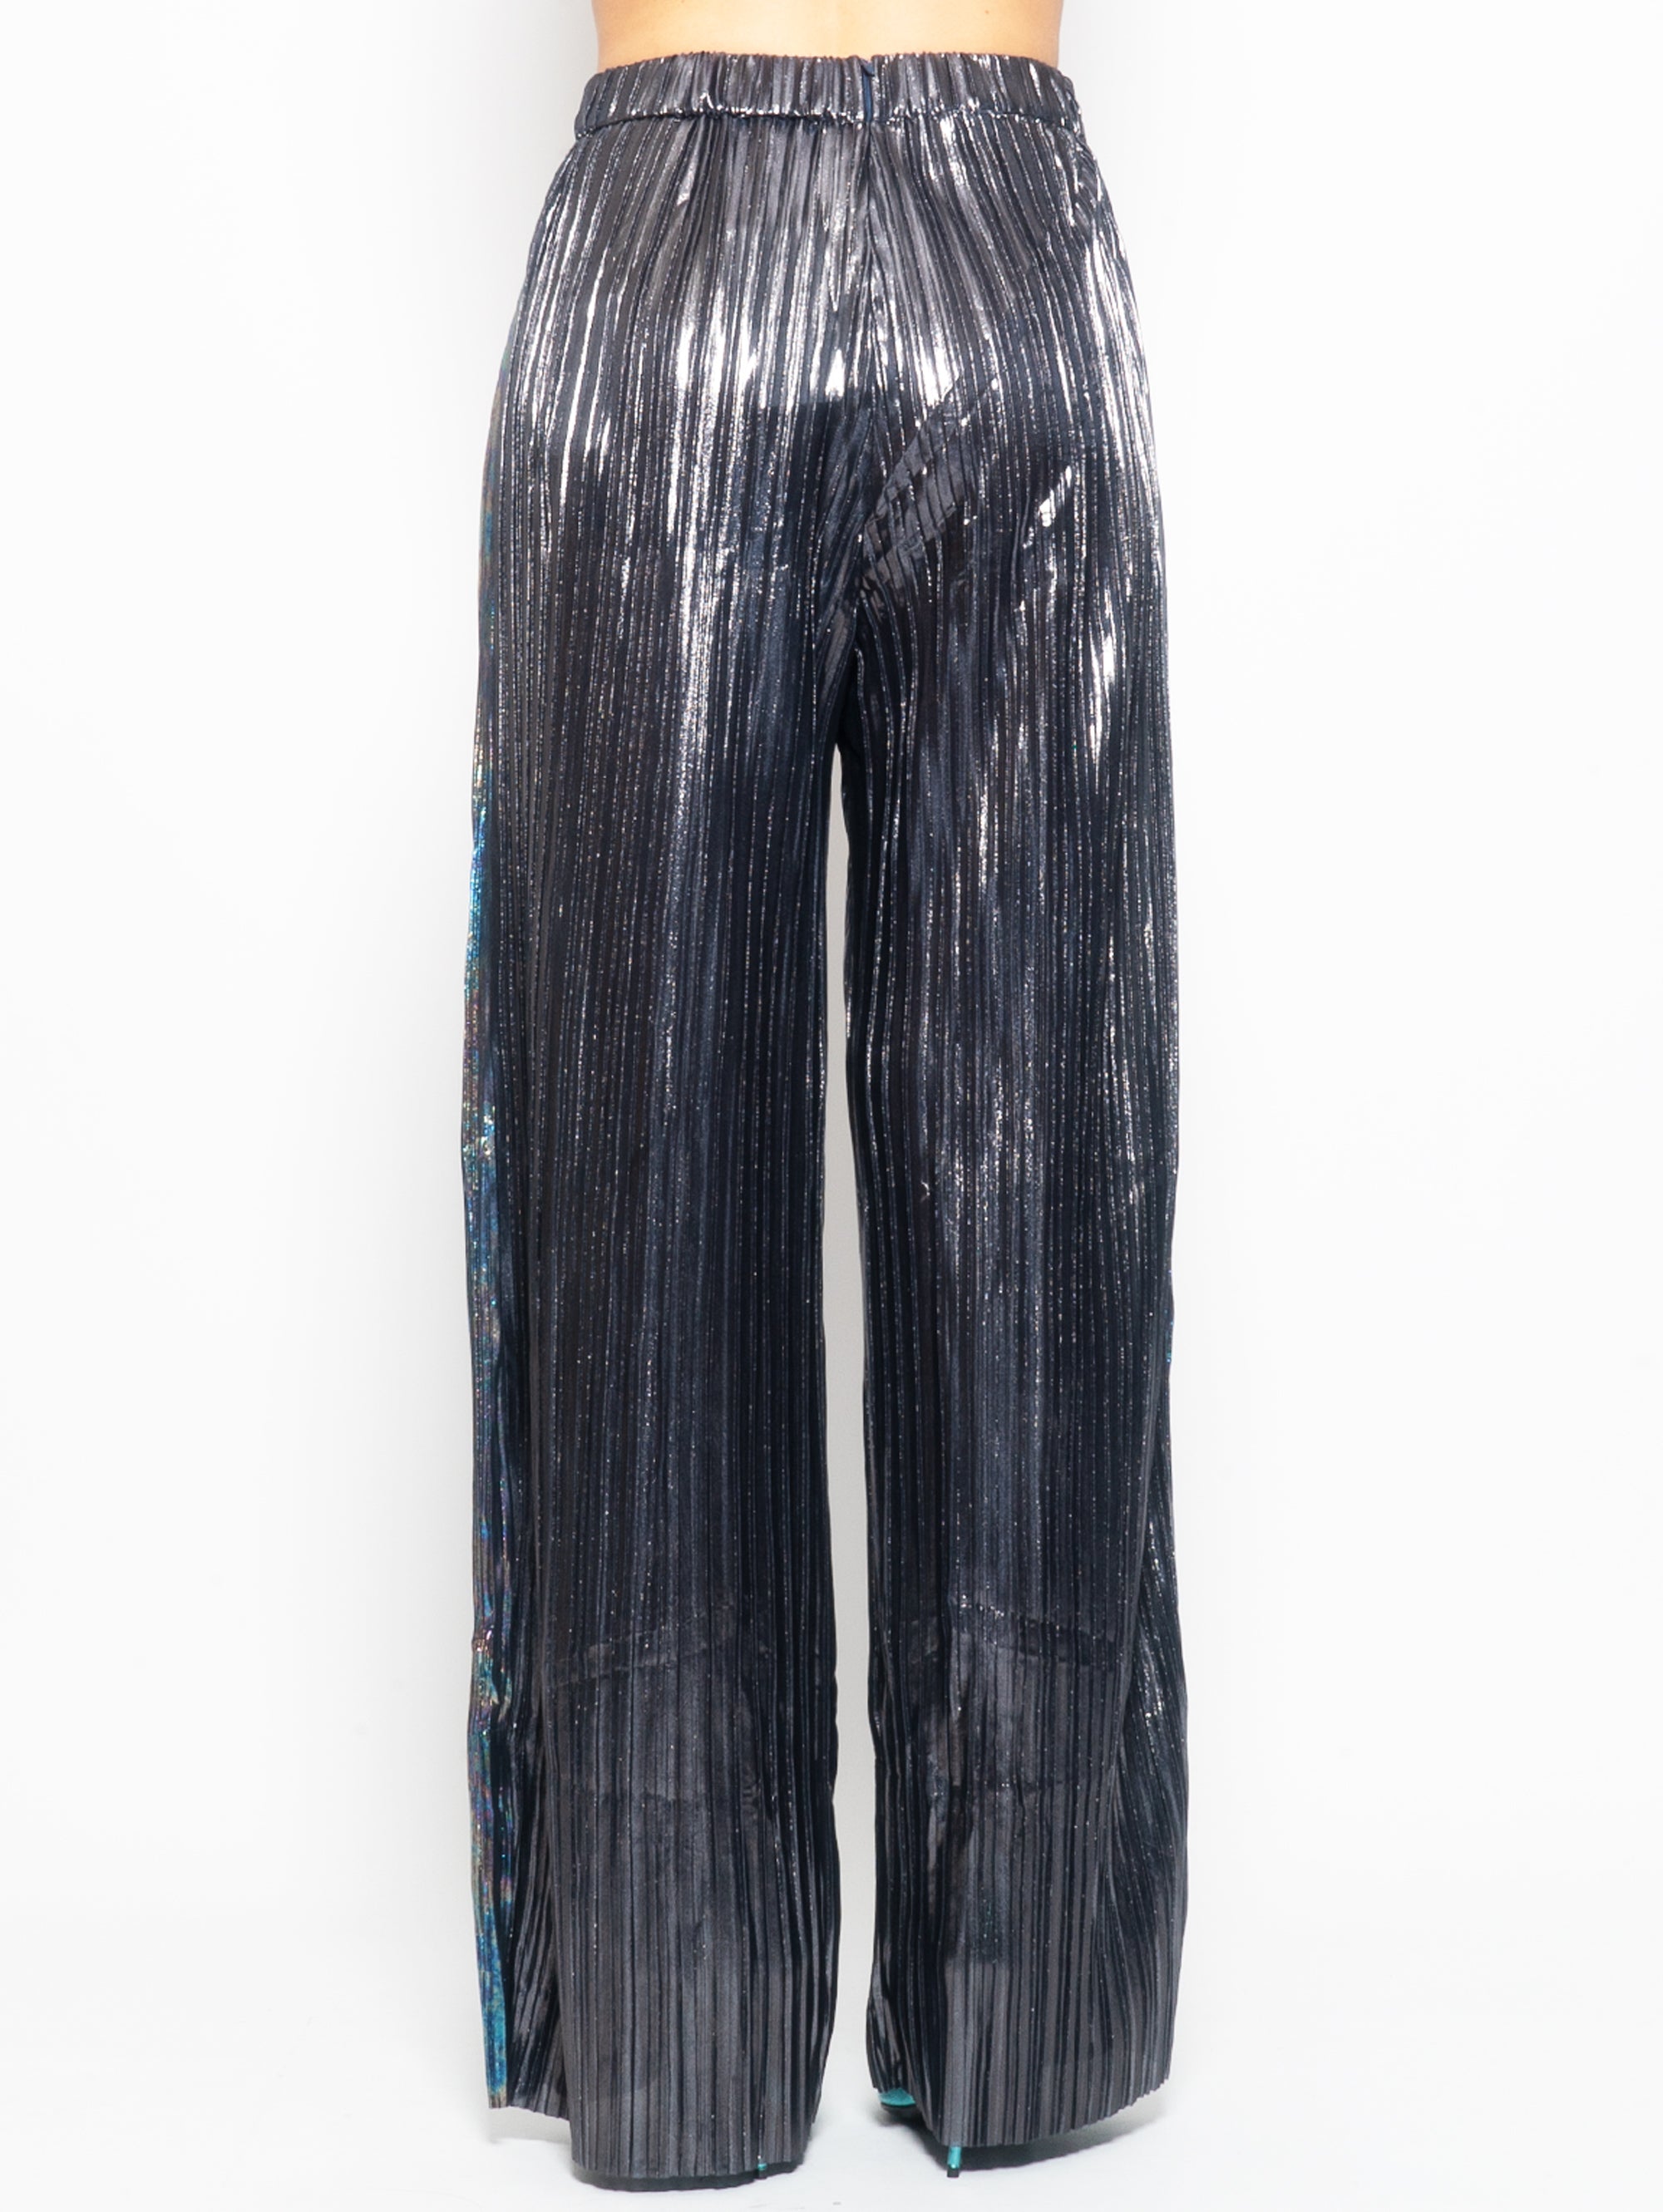 Trousers in burnished metal pleated laminate